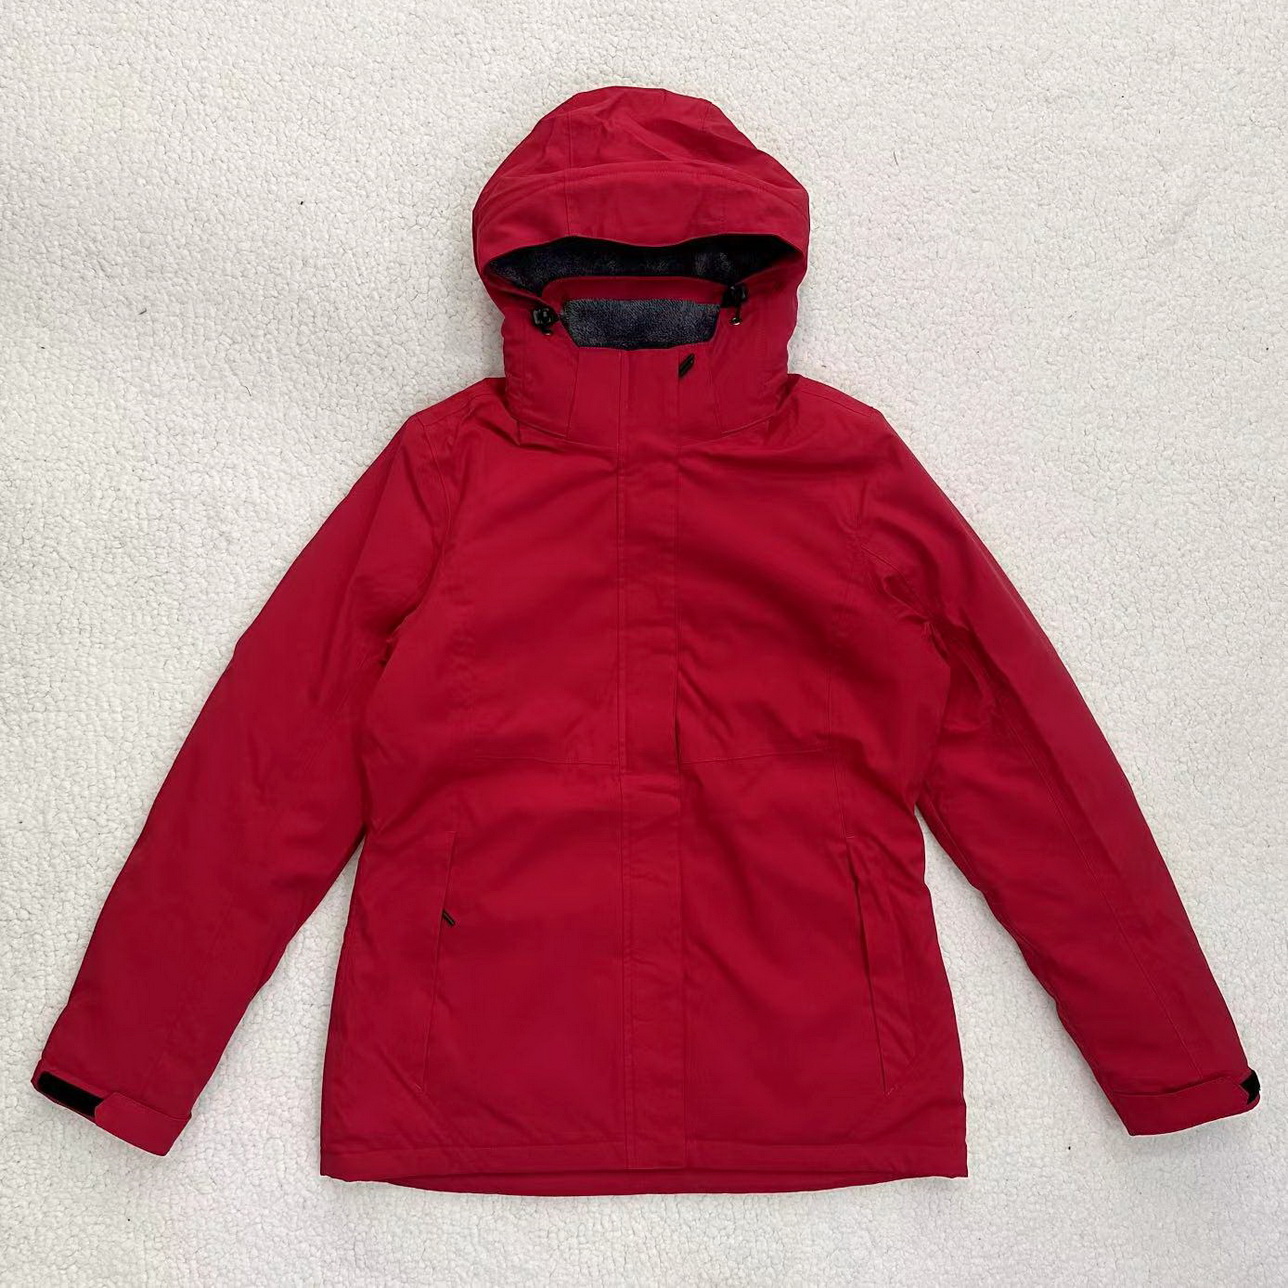 Lady Jacket Padding Apparel Winter Coat Fashion Red Clothes Outdoor Clothing